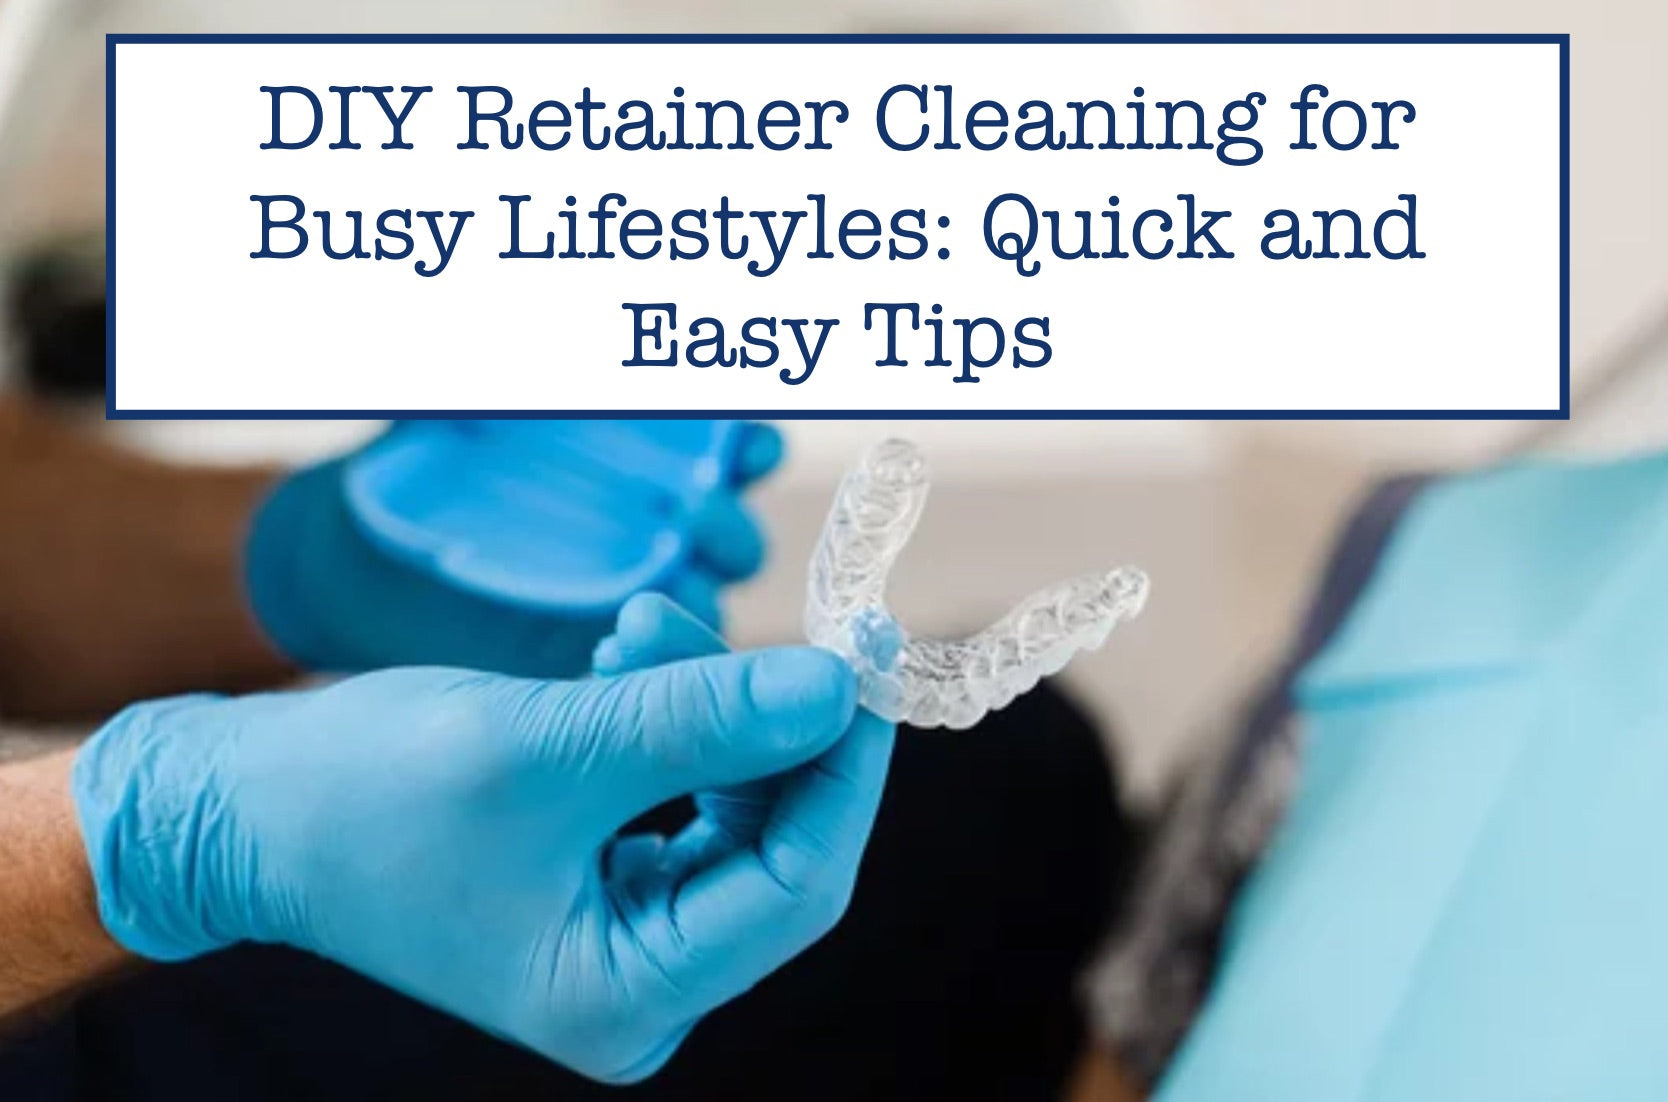 DIY Retainer Cleaning for Busy Lifestyles: Quick and Easy Tips